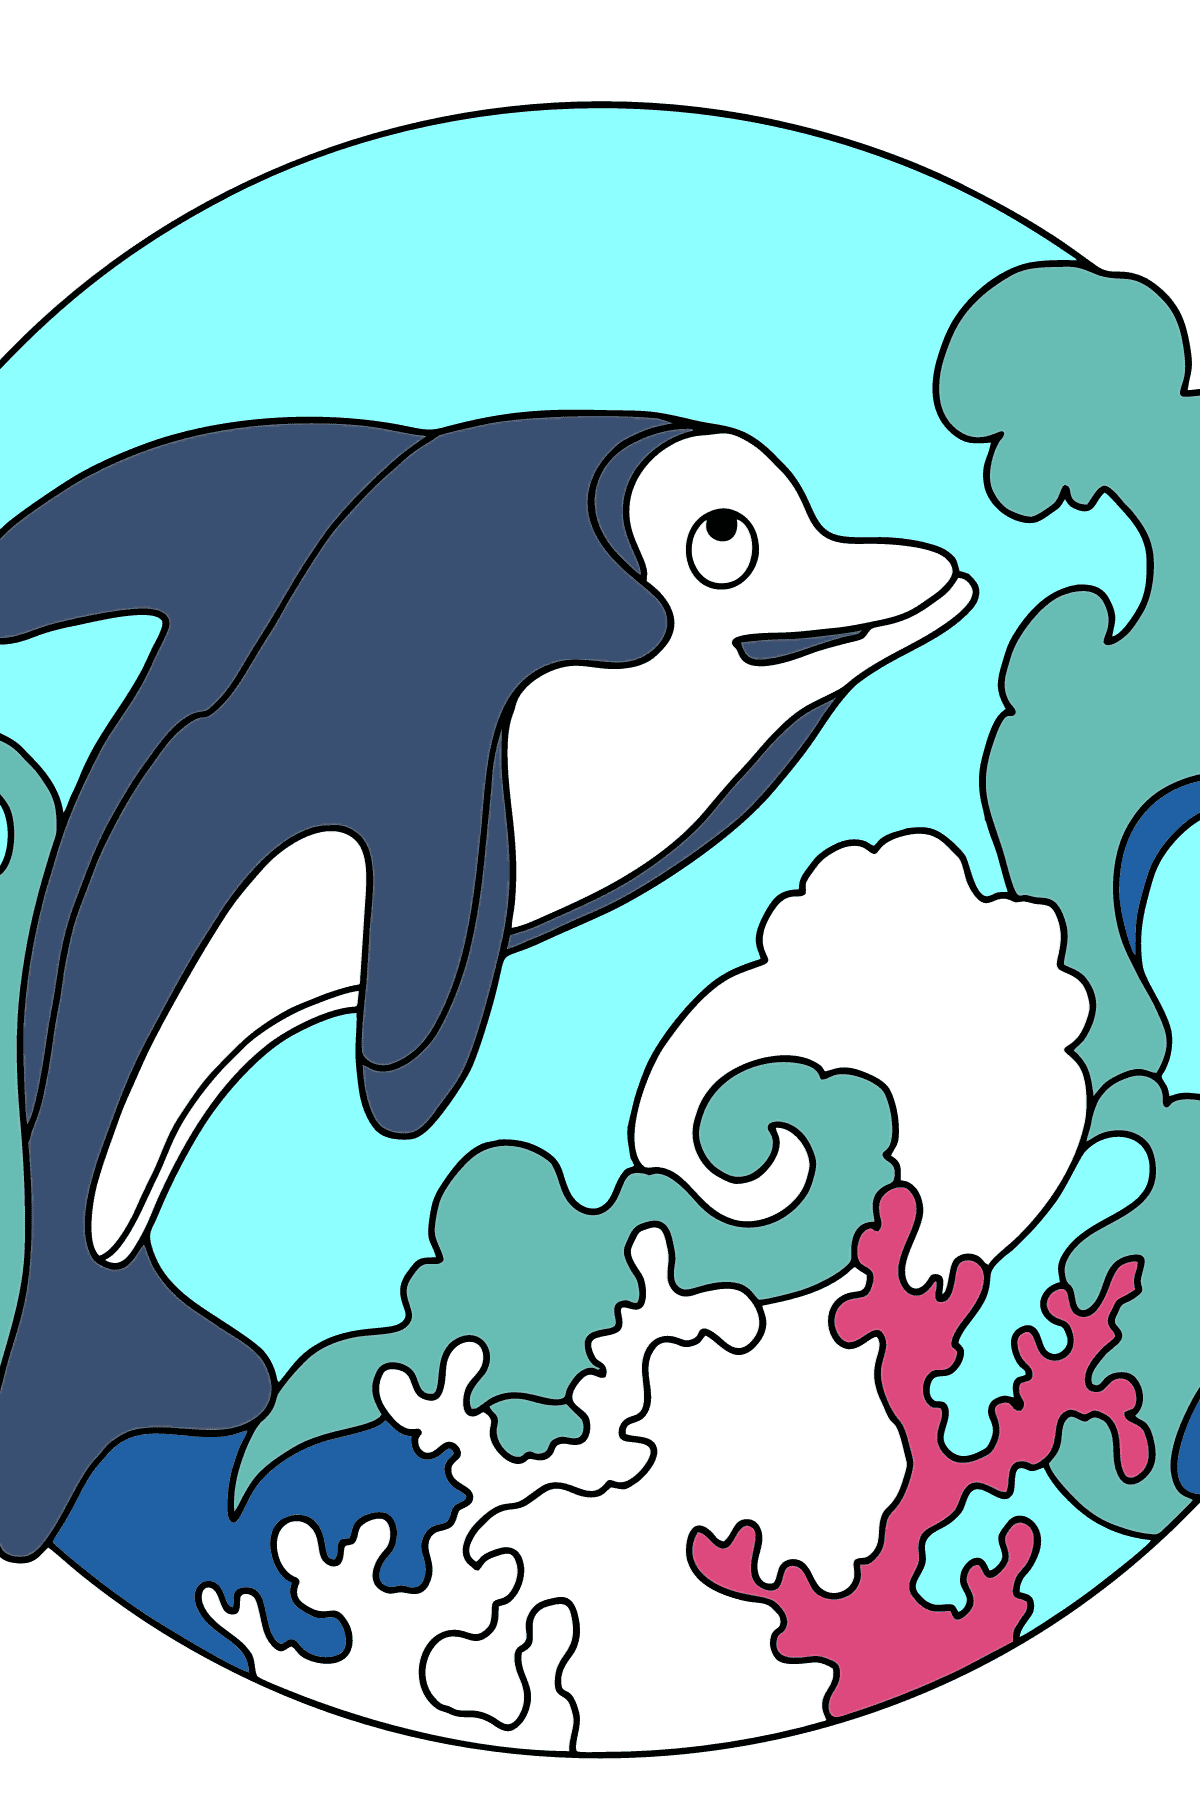 Coloring Page - A Dolphin, a Smart and Friendly Animal - Coloring Pages for Children